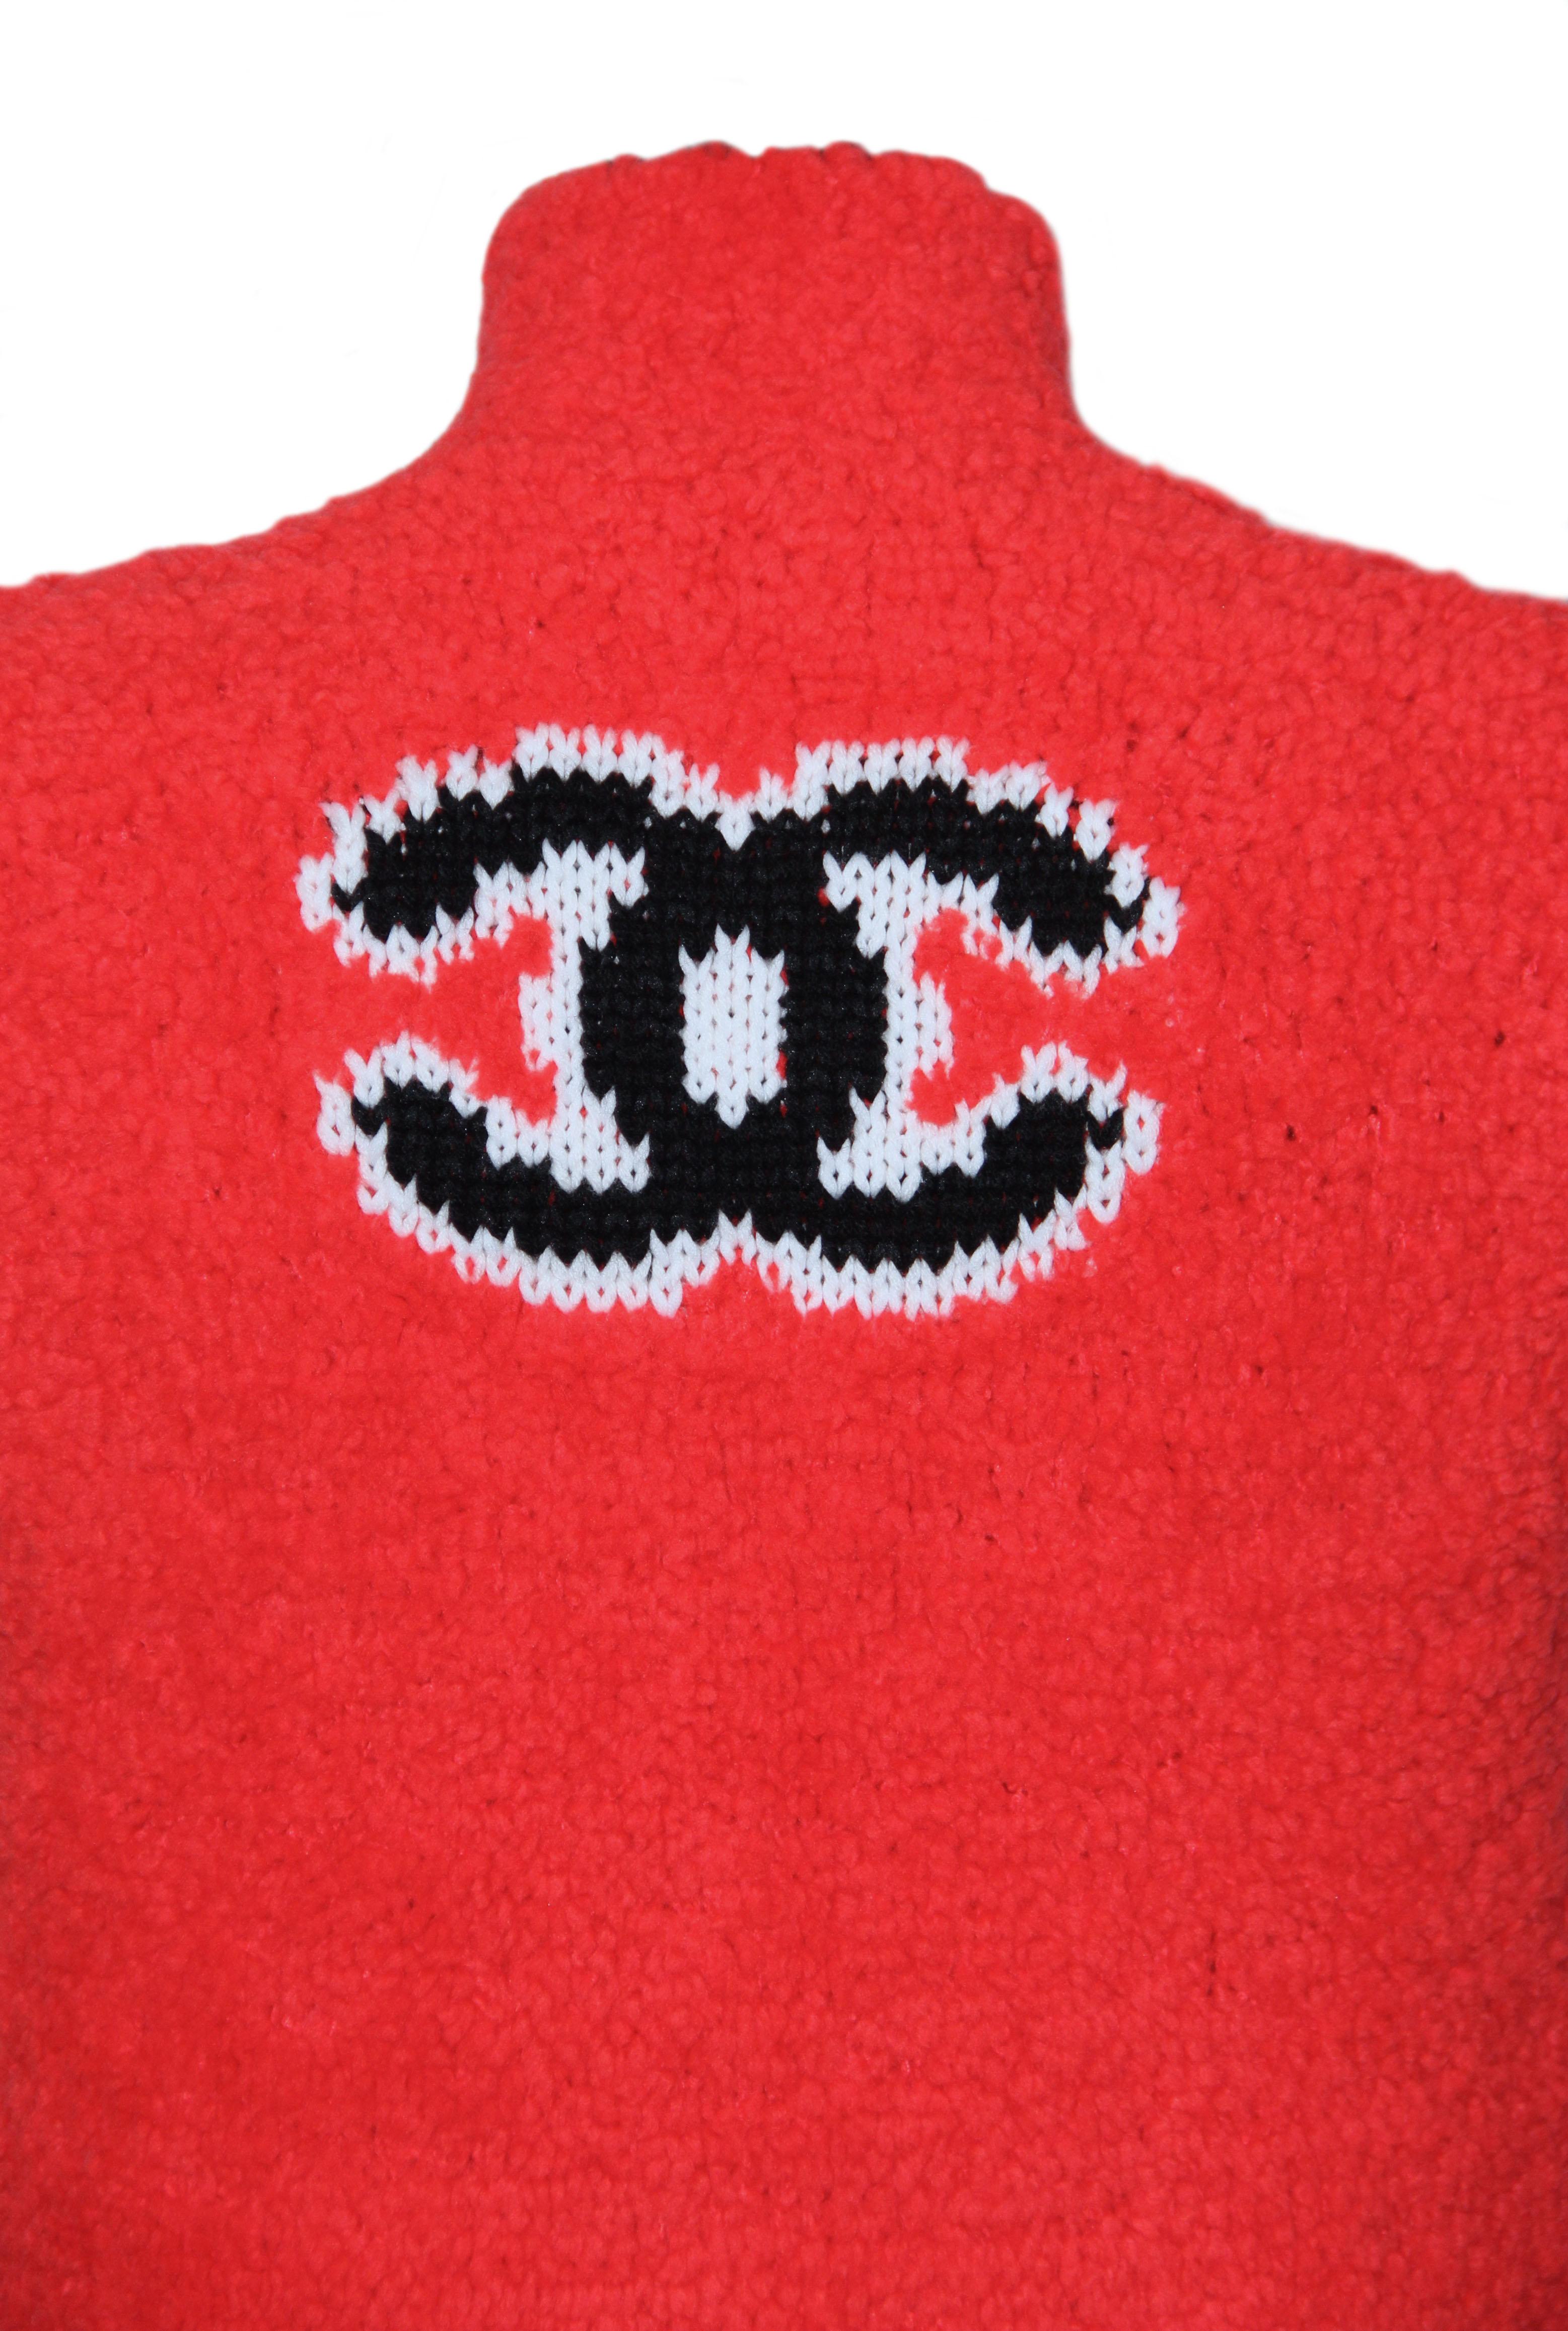 From the last collection of Karl Lagerfeld for the House of Chanel, this new Teddy zip up vest is crafted in a beautiful coral red tone wool mix with a shearling look !
It features a black and white CC Logo on the back as well as black and white CC